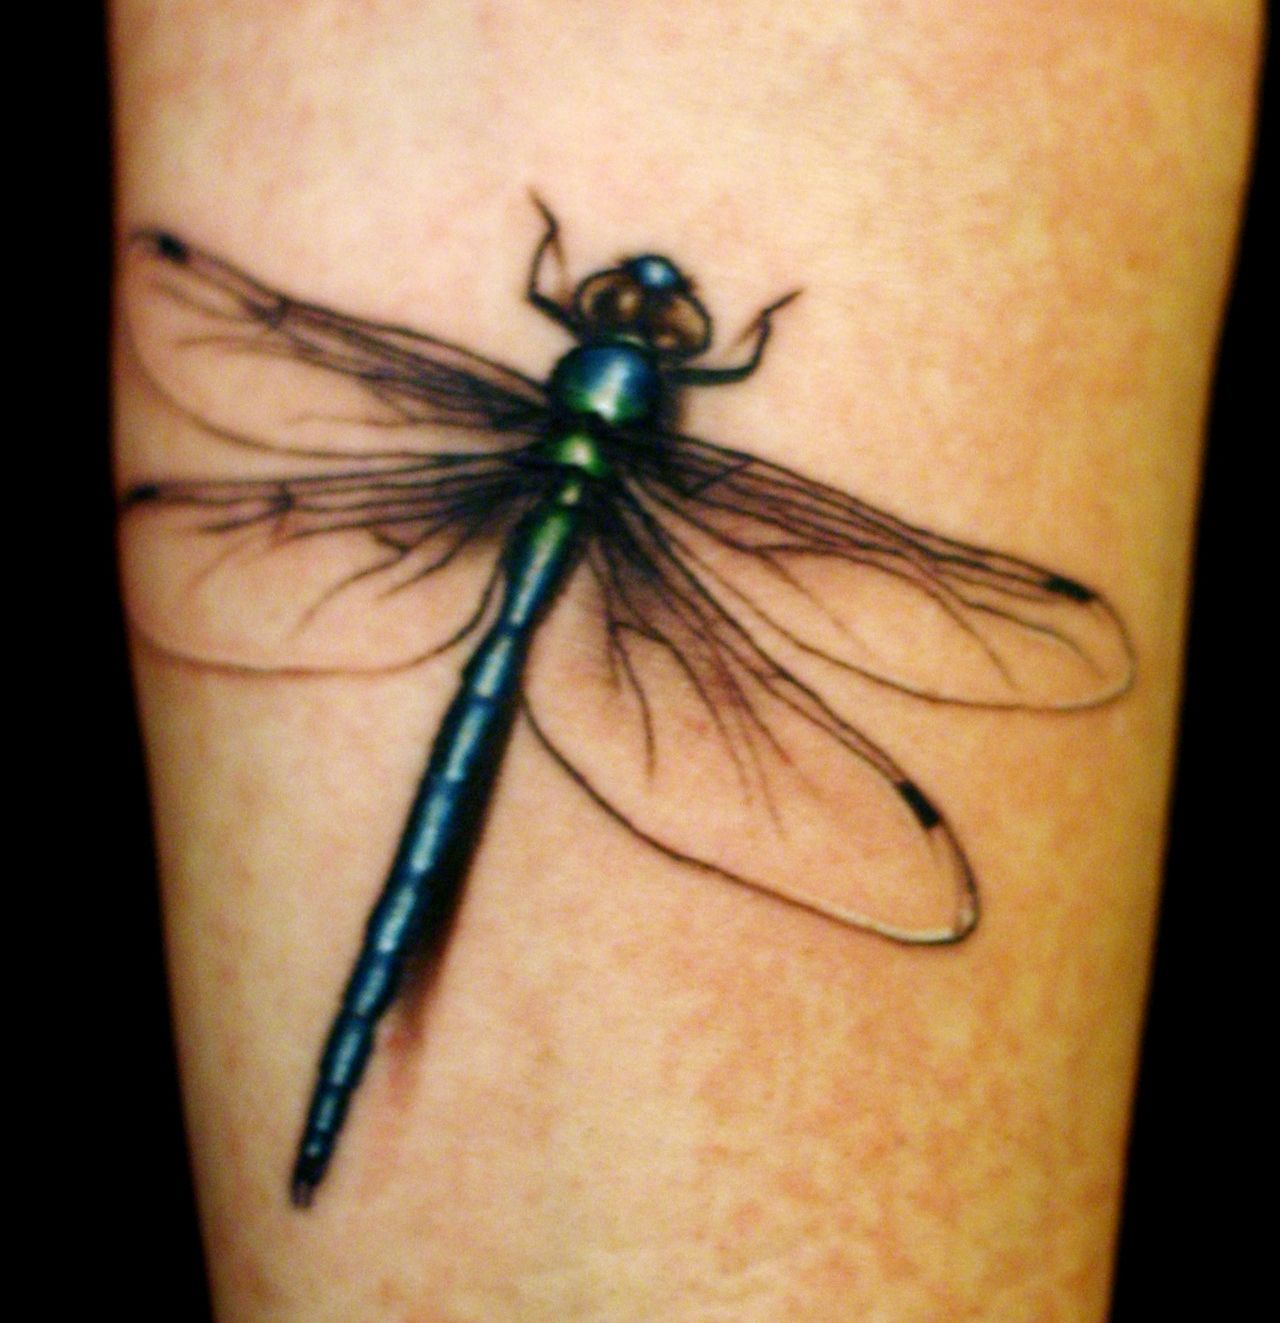 Black outline wings & colored dragonfly tattoo on arm